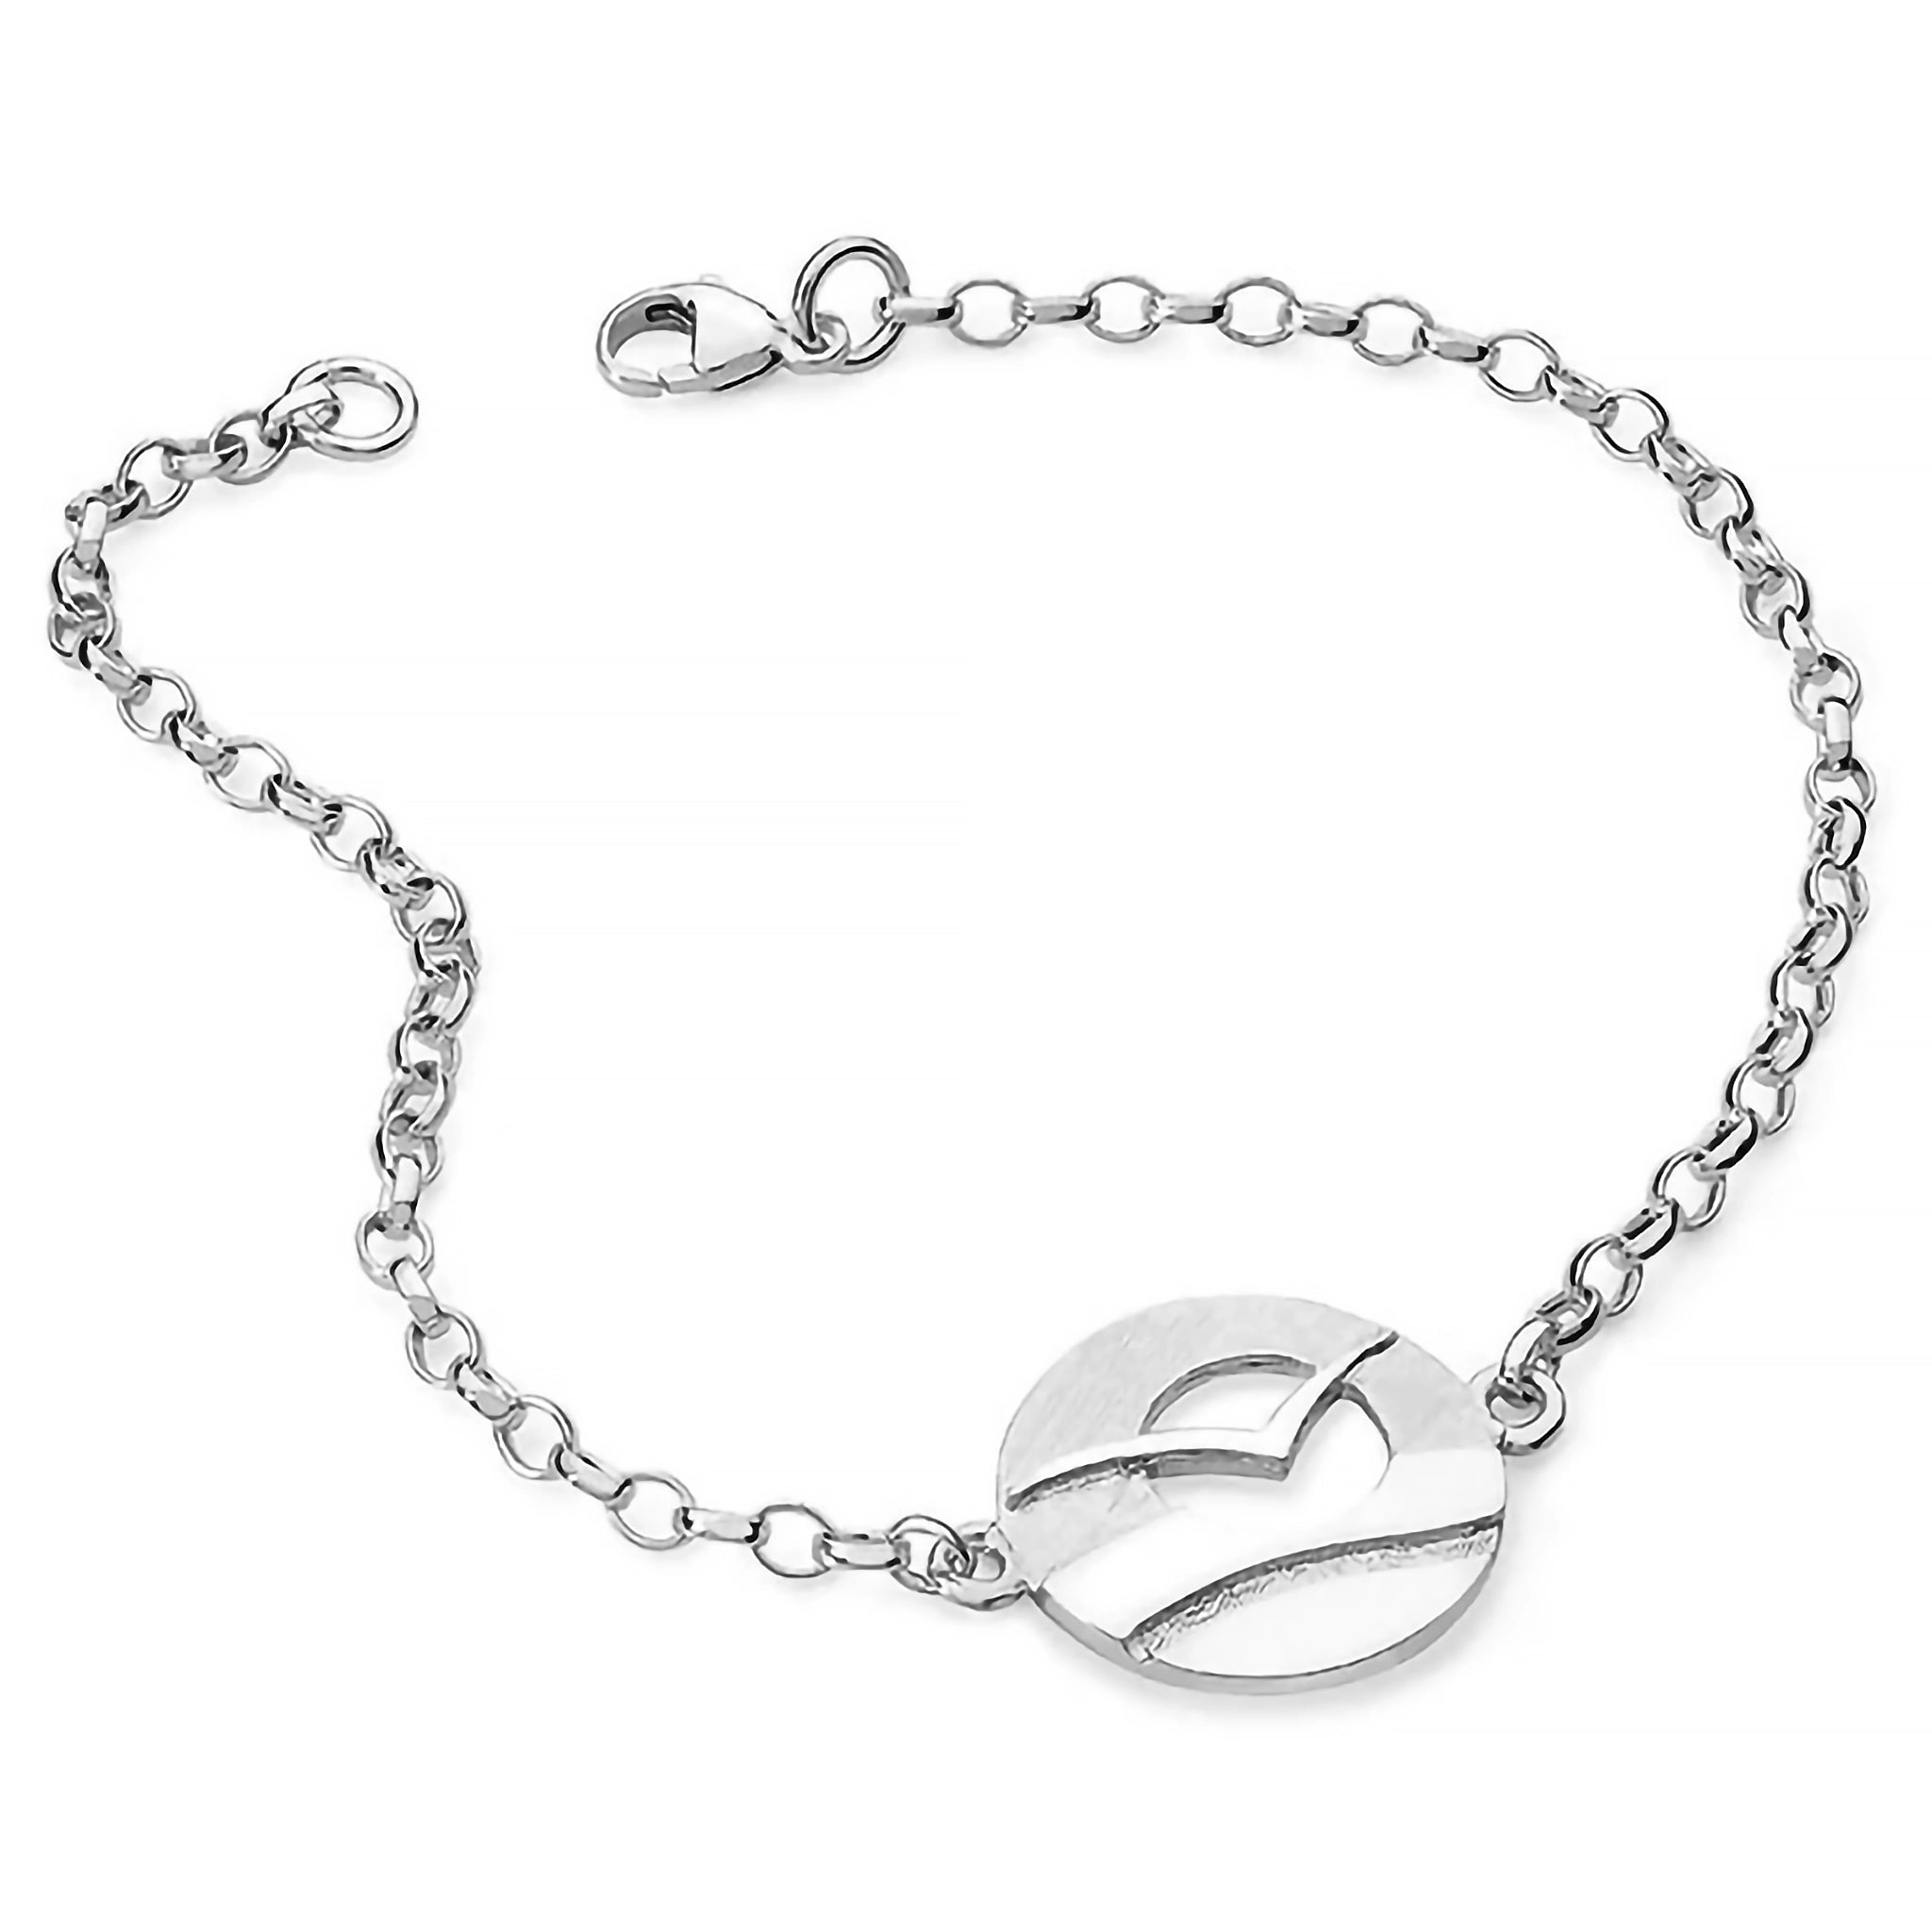 A silver bracelet featuring a round link with a flying sea bird in front of a cutout sun over water